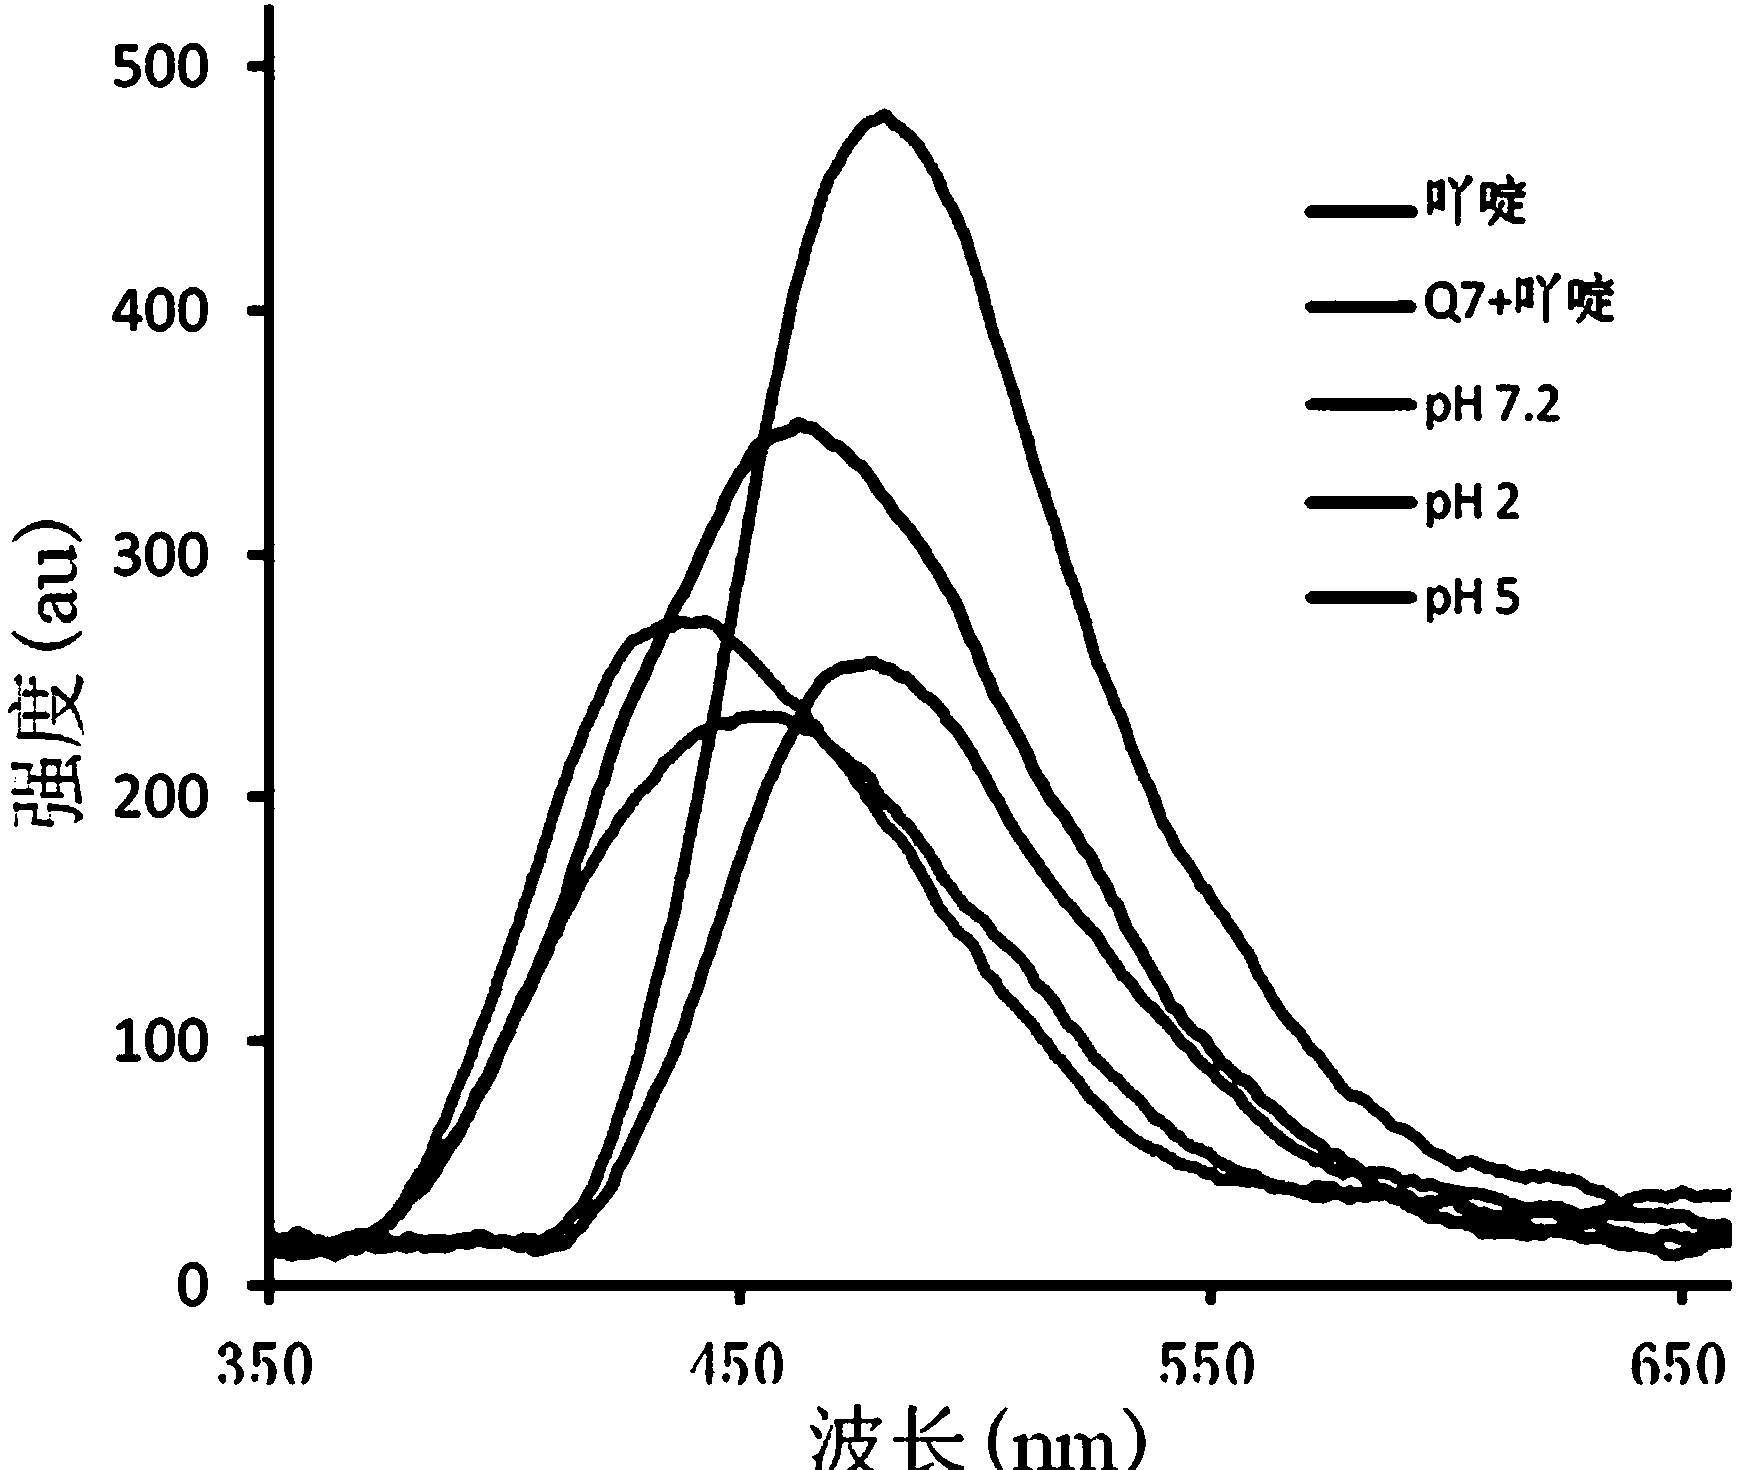 Fluorescence detection method for amino acid under different pH values